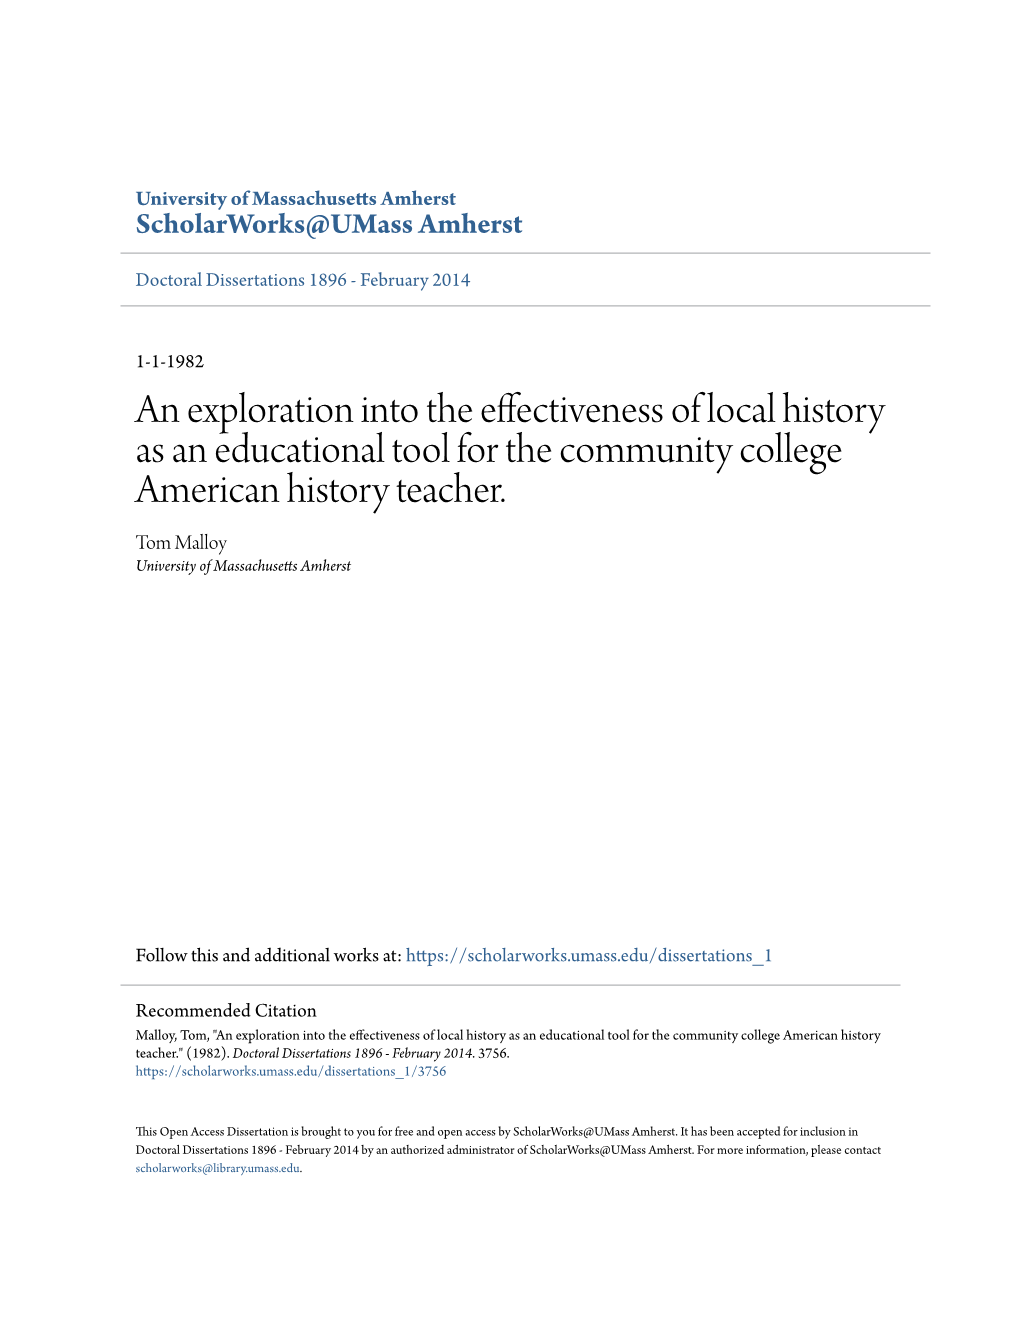 An Exploration Into the Effectiveness of Local History As an Educational Tool for the Community College American History Teacher